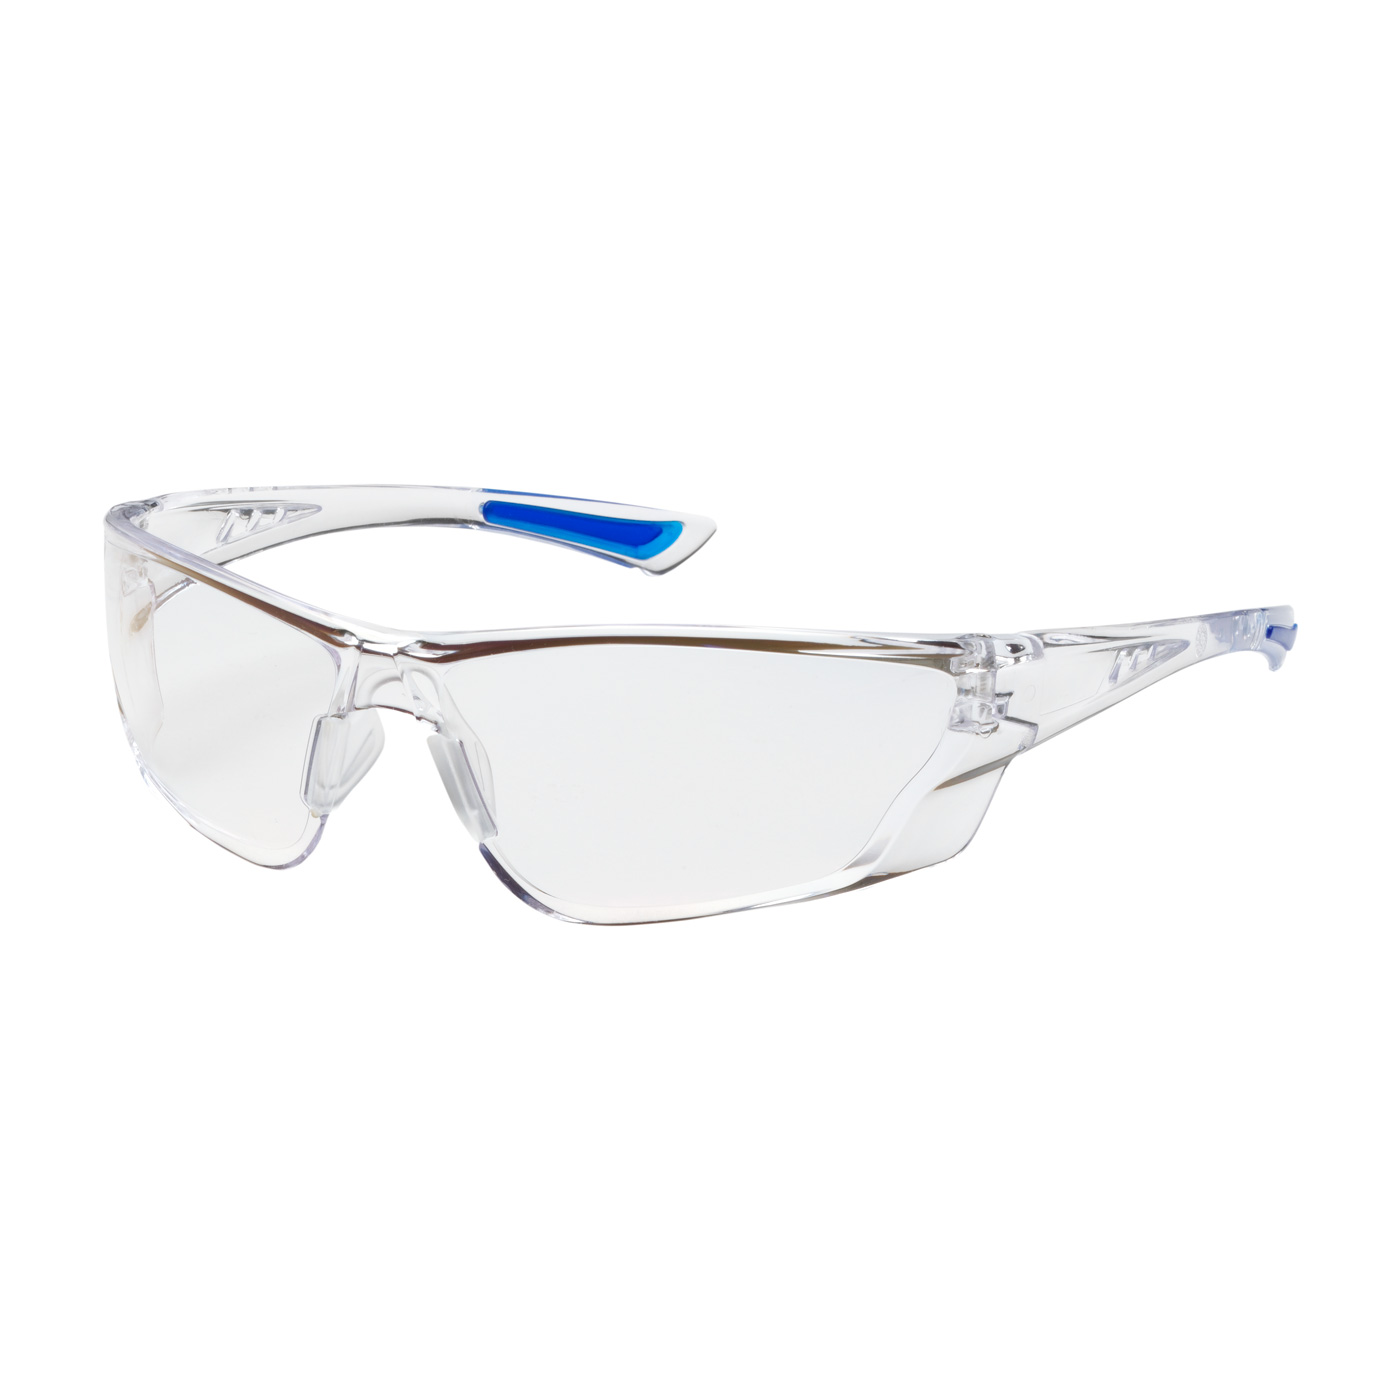 PIP 250-32-0520 Recon Rimless Safety Glasses with Clear Temple, Clear Lens and Anti-Scratch/FogLess 3Sixty Coating PID-250 32 0520